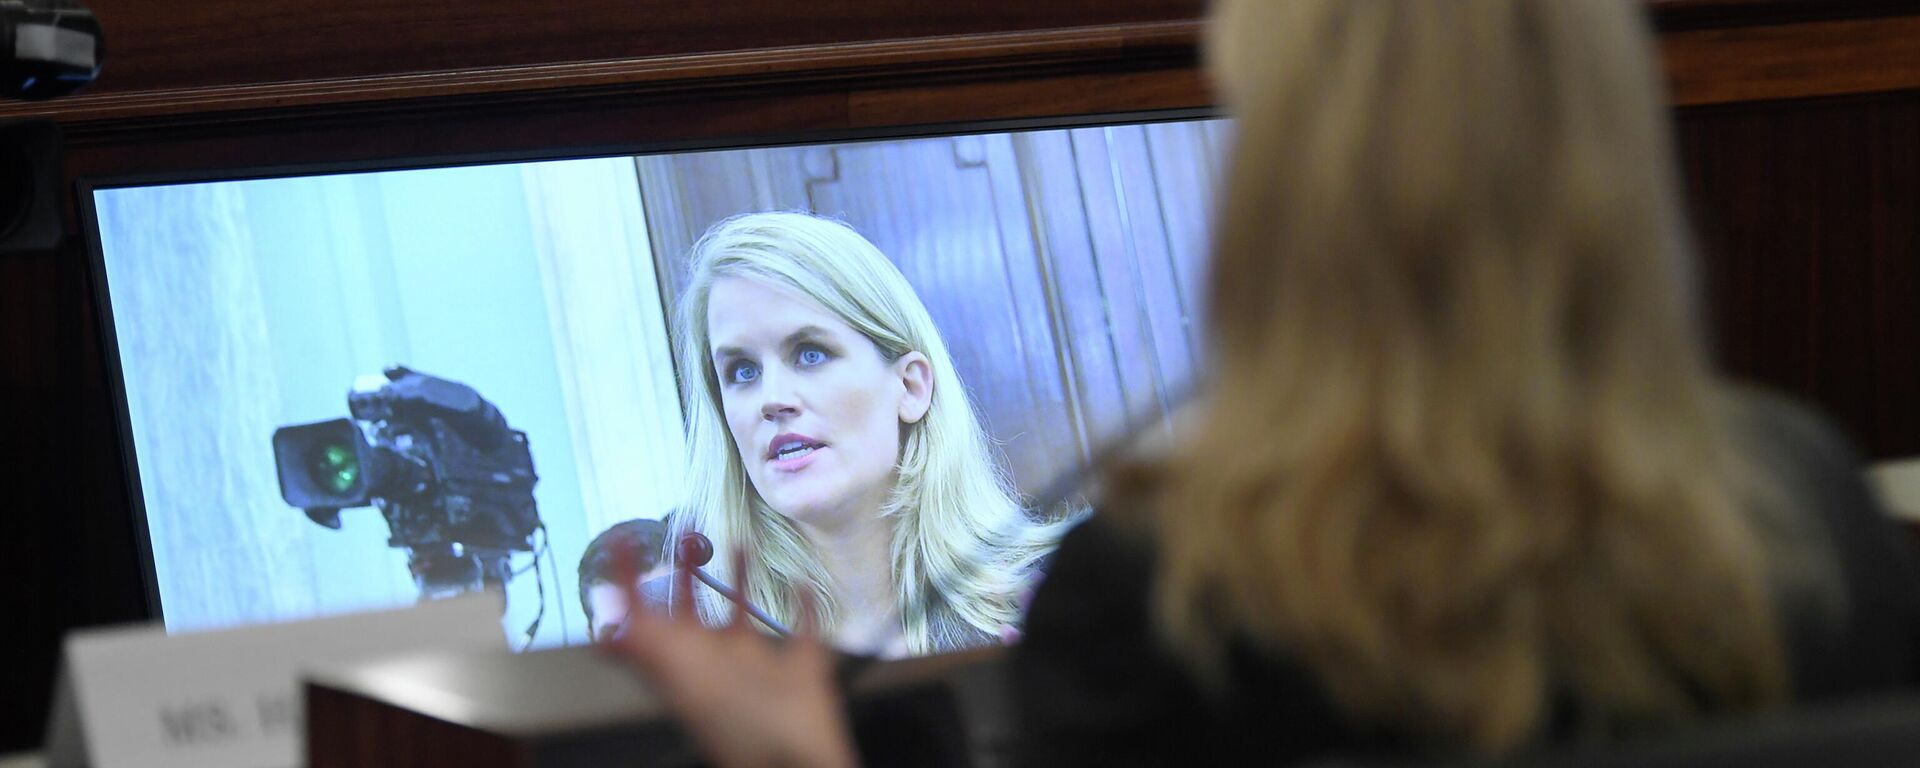 Former Facebook employee and whistleblower Frances Haugen testifies during a Senate Committee on Commerce, Science, and Transportation hearing entitled 'Protecting Kids Online: Testimony from a Facebook Whistleblower' on Capitol Hill, in Washington, U.S., October 5, 2021 - Sputnik International, 1920, 10.10.2021